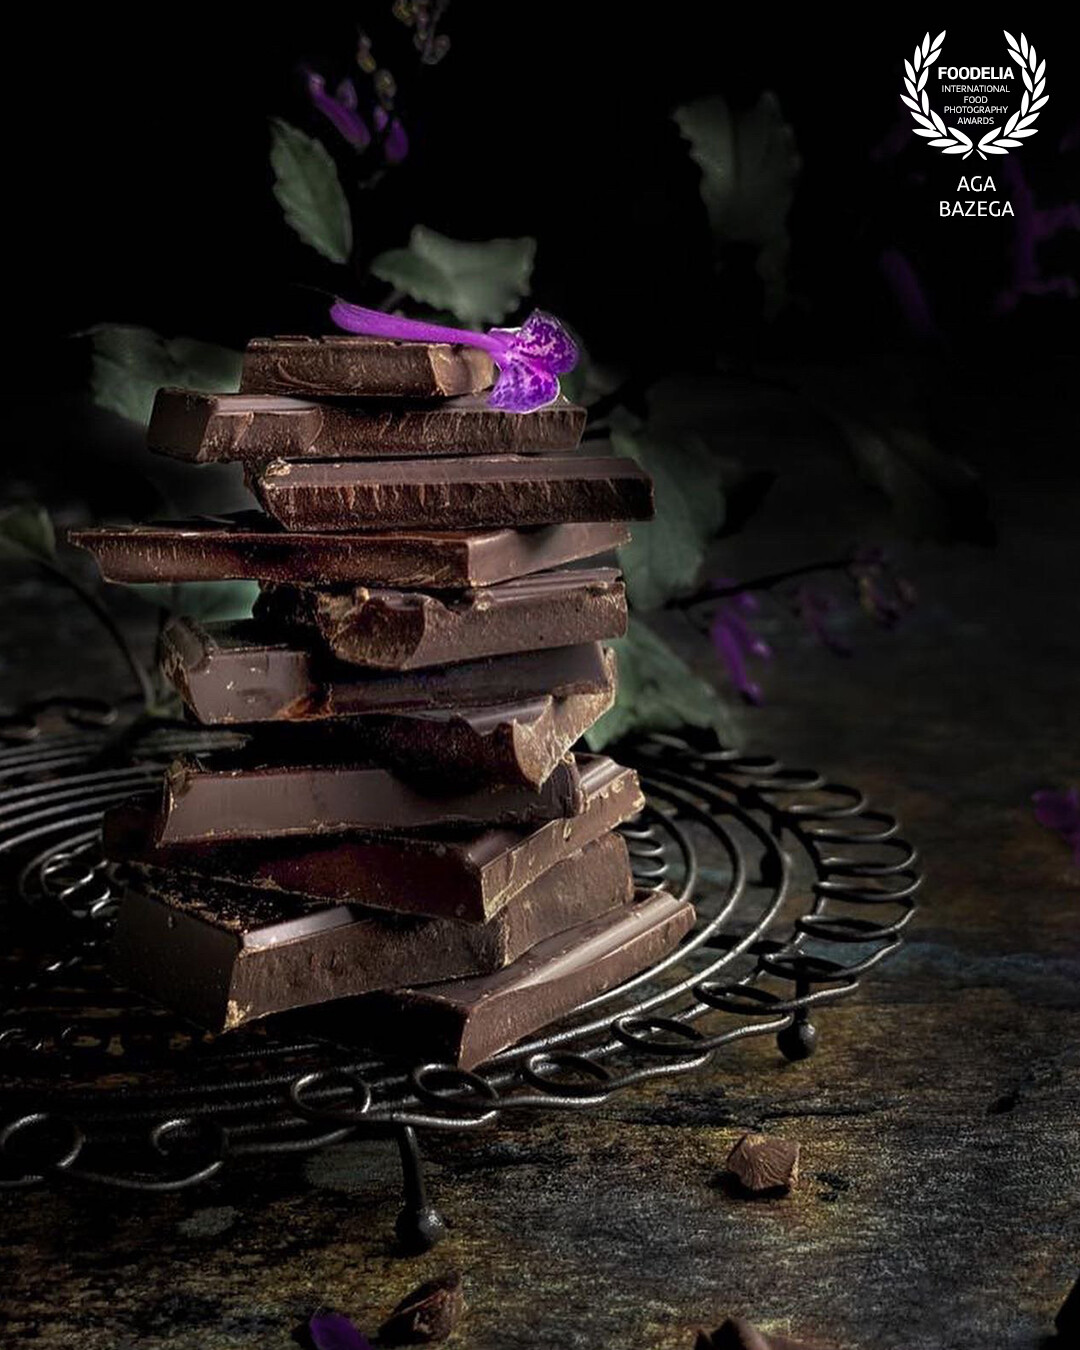 Lavender chocolate bars, image captured with natural light.